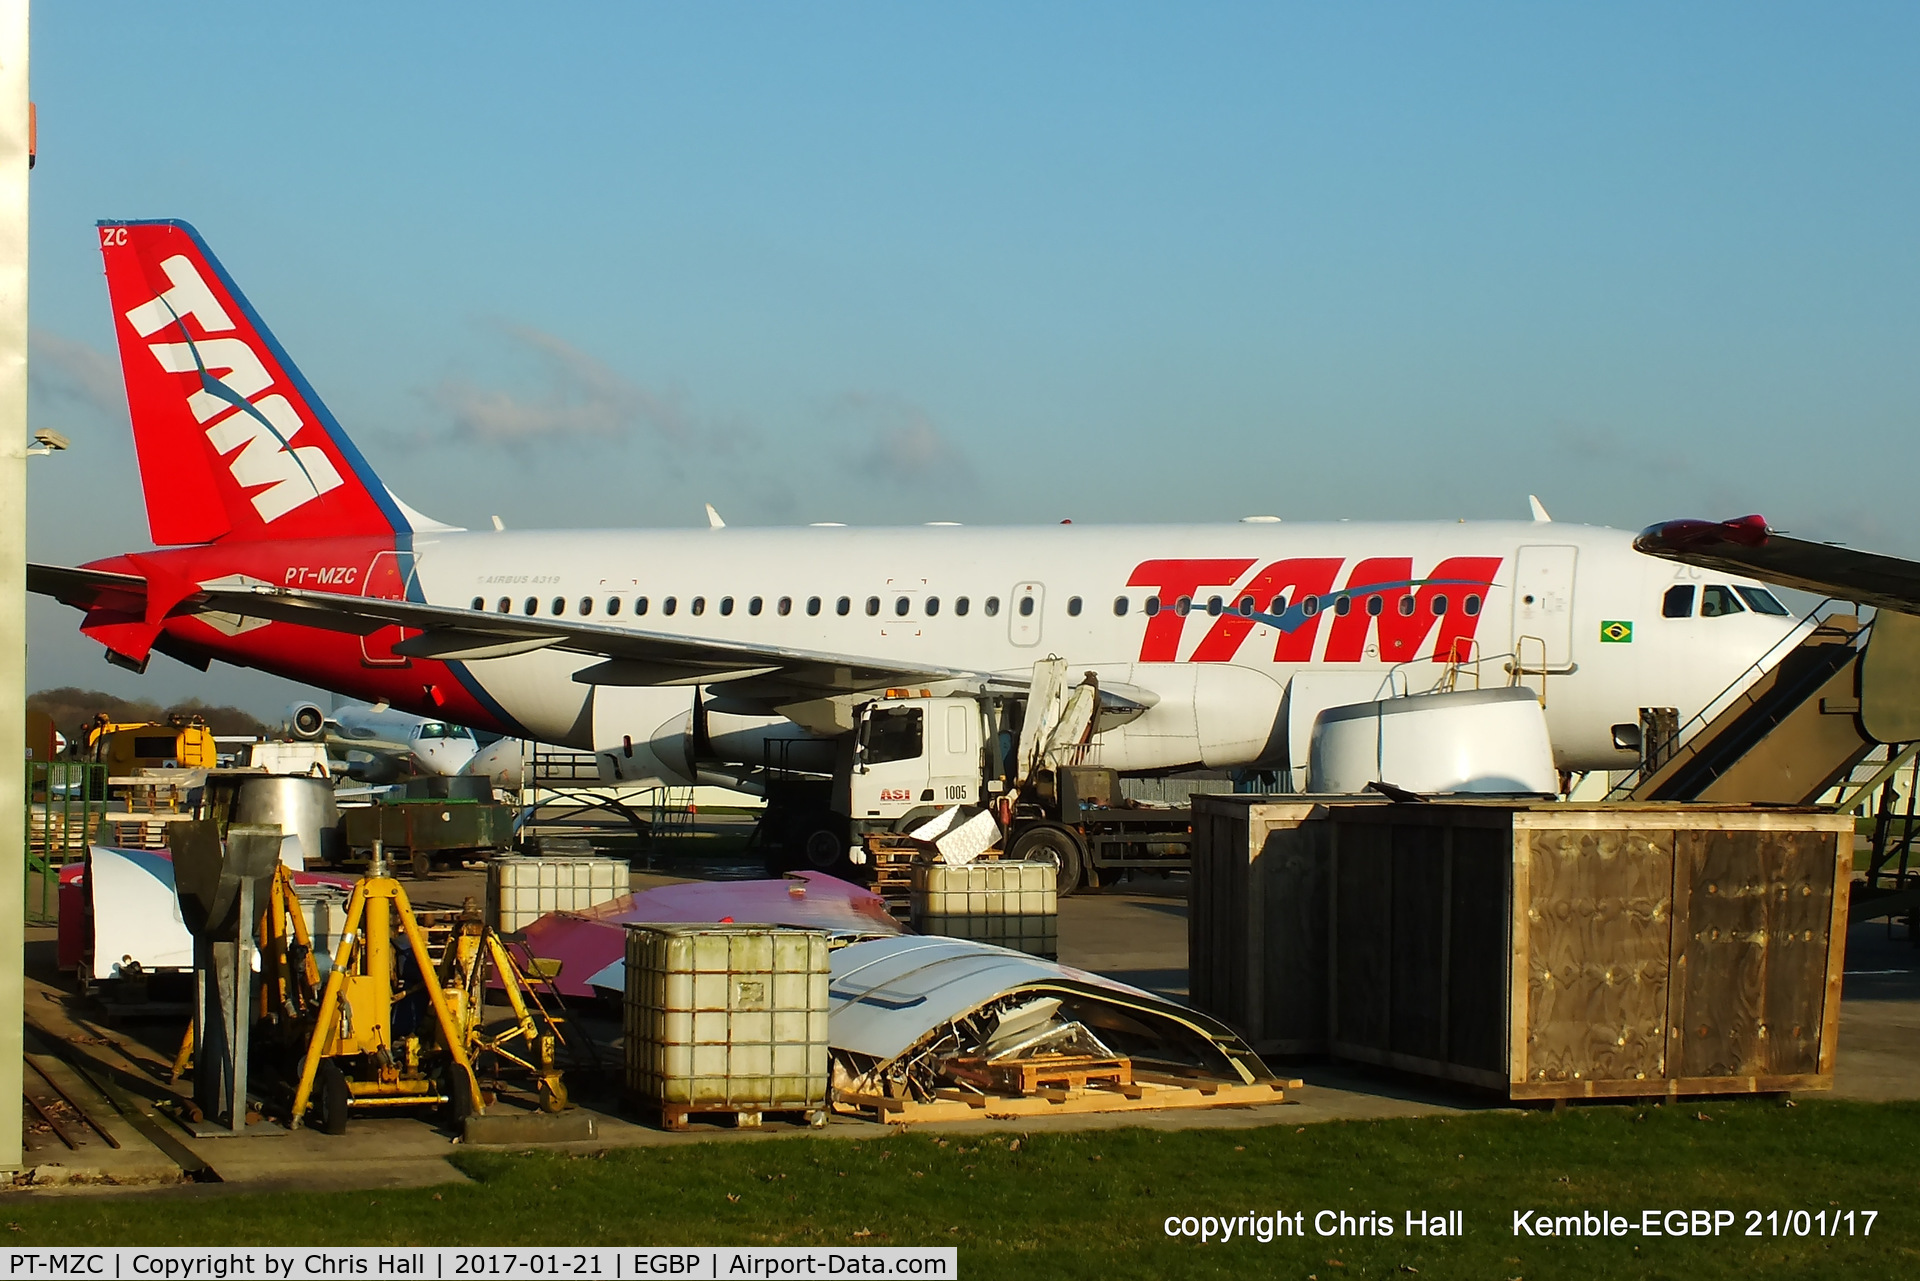 PT-MZC, 1999 Airbus A319-132 C/N 1092, being parted out by ASI at Kemble